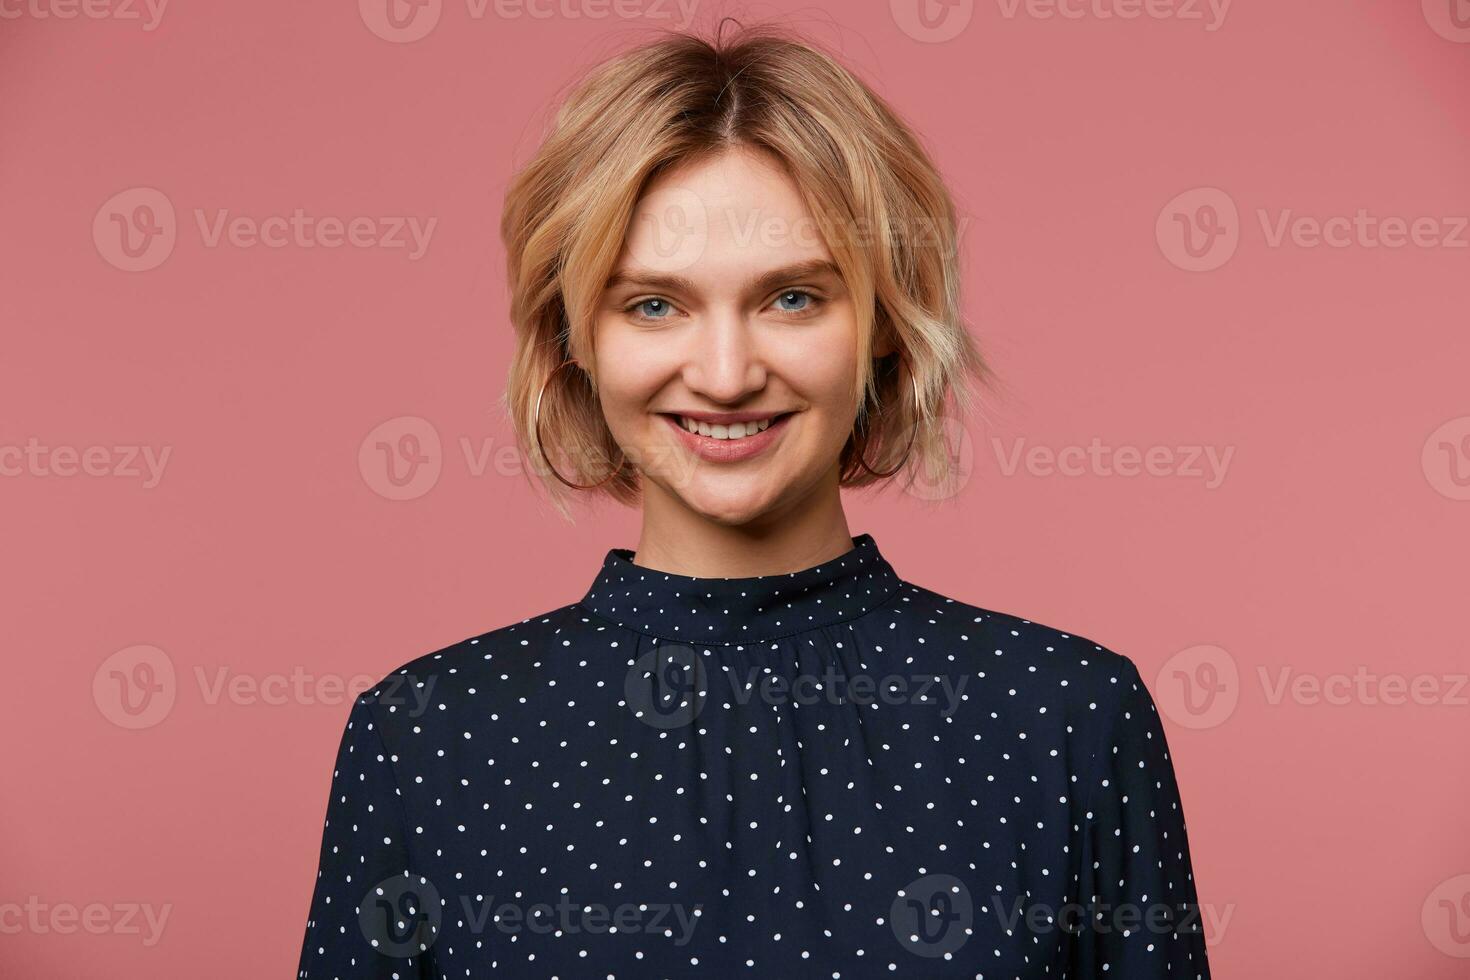 Pleasantly smiling young beautiful attractive blonde woman isolated over pink background dressed in blouse with polka dots, has glad face expression, showing positive, happiness photo